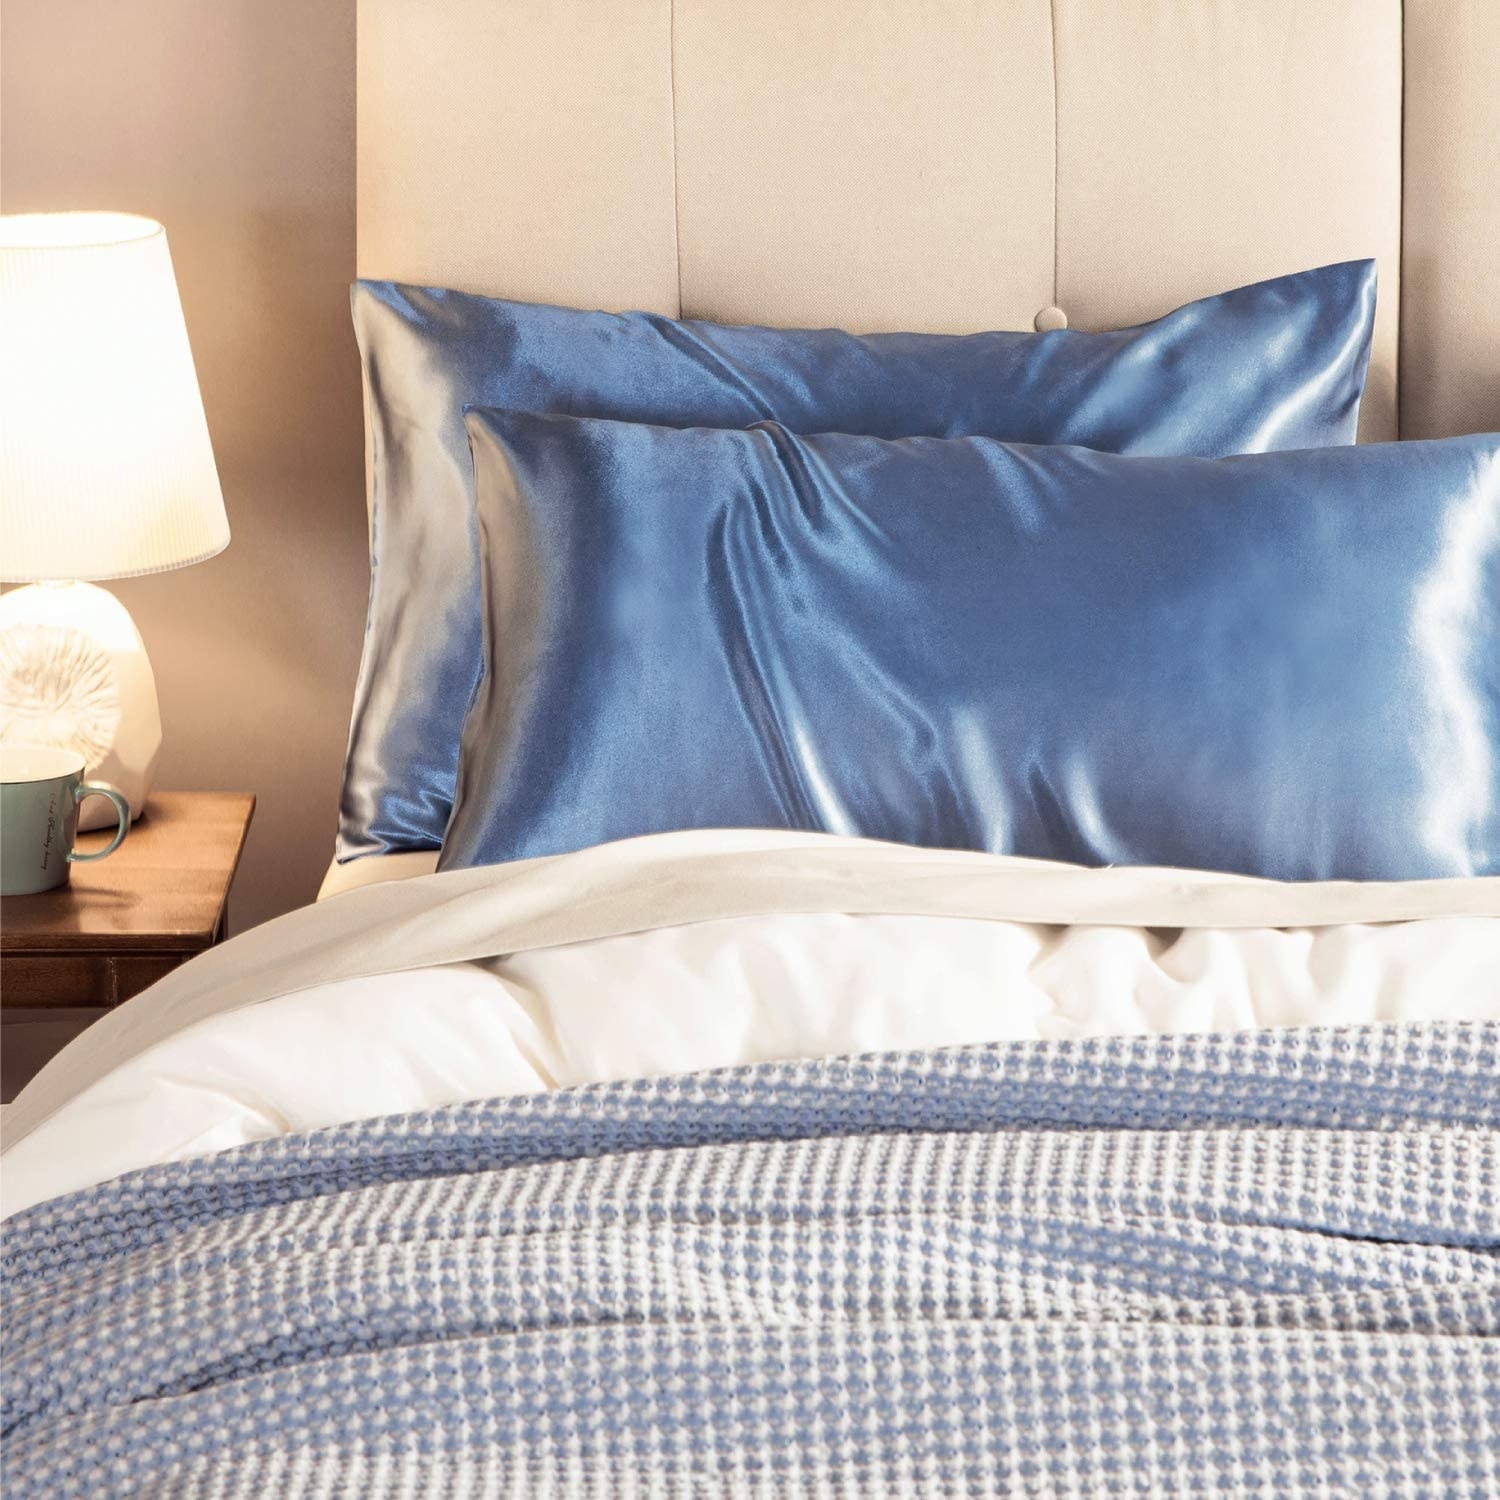 Two blue satin pillowcases on pillows and styled on a bed